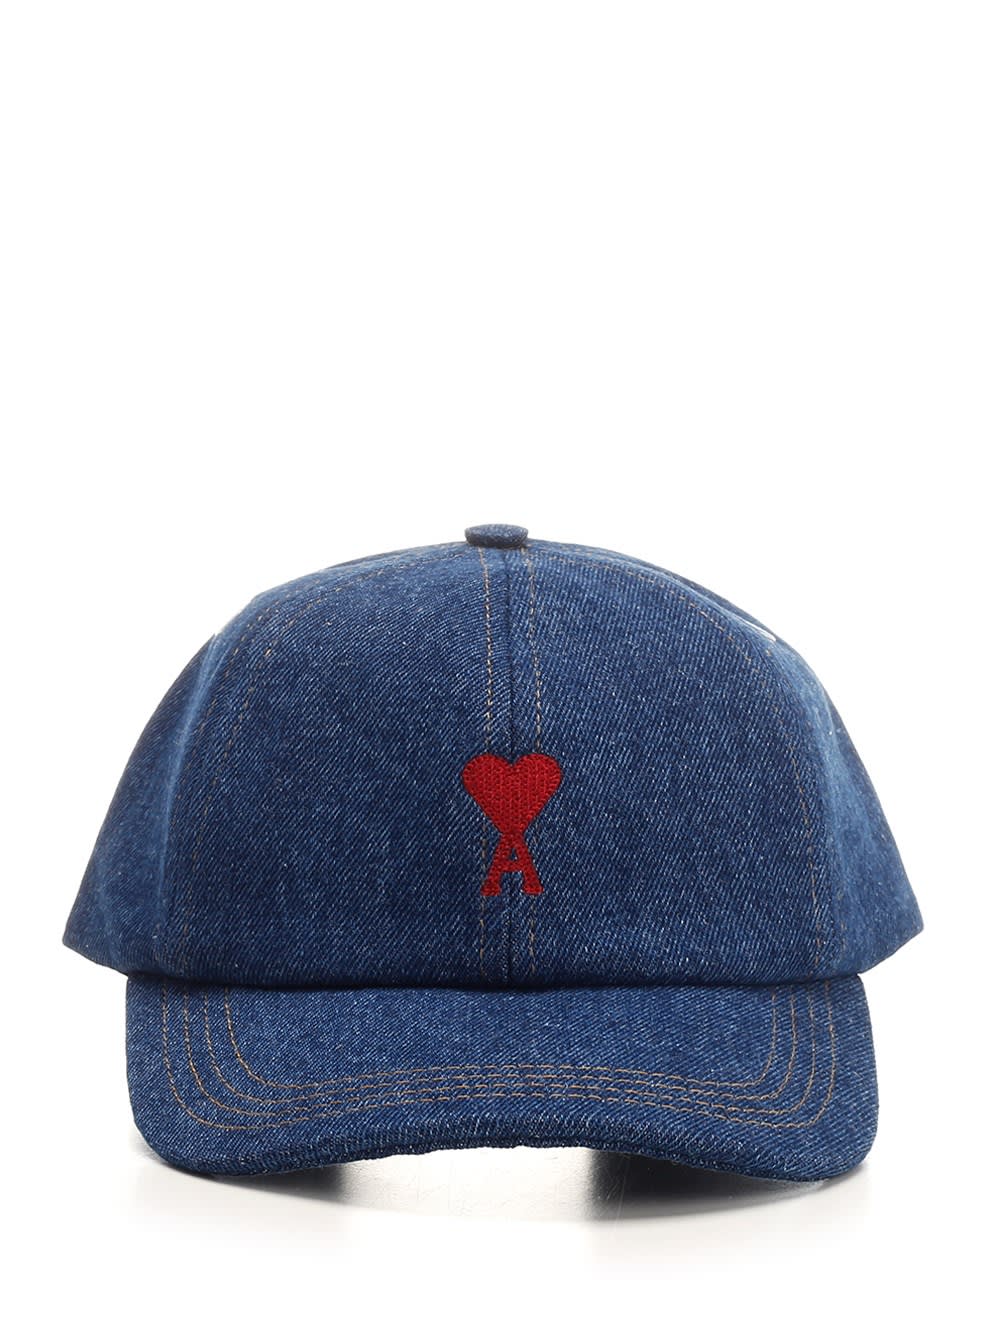 Denim Cap With Embroidery